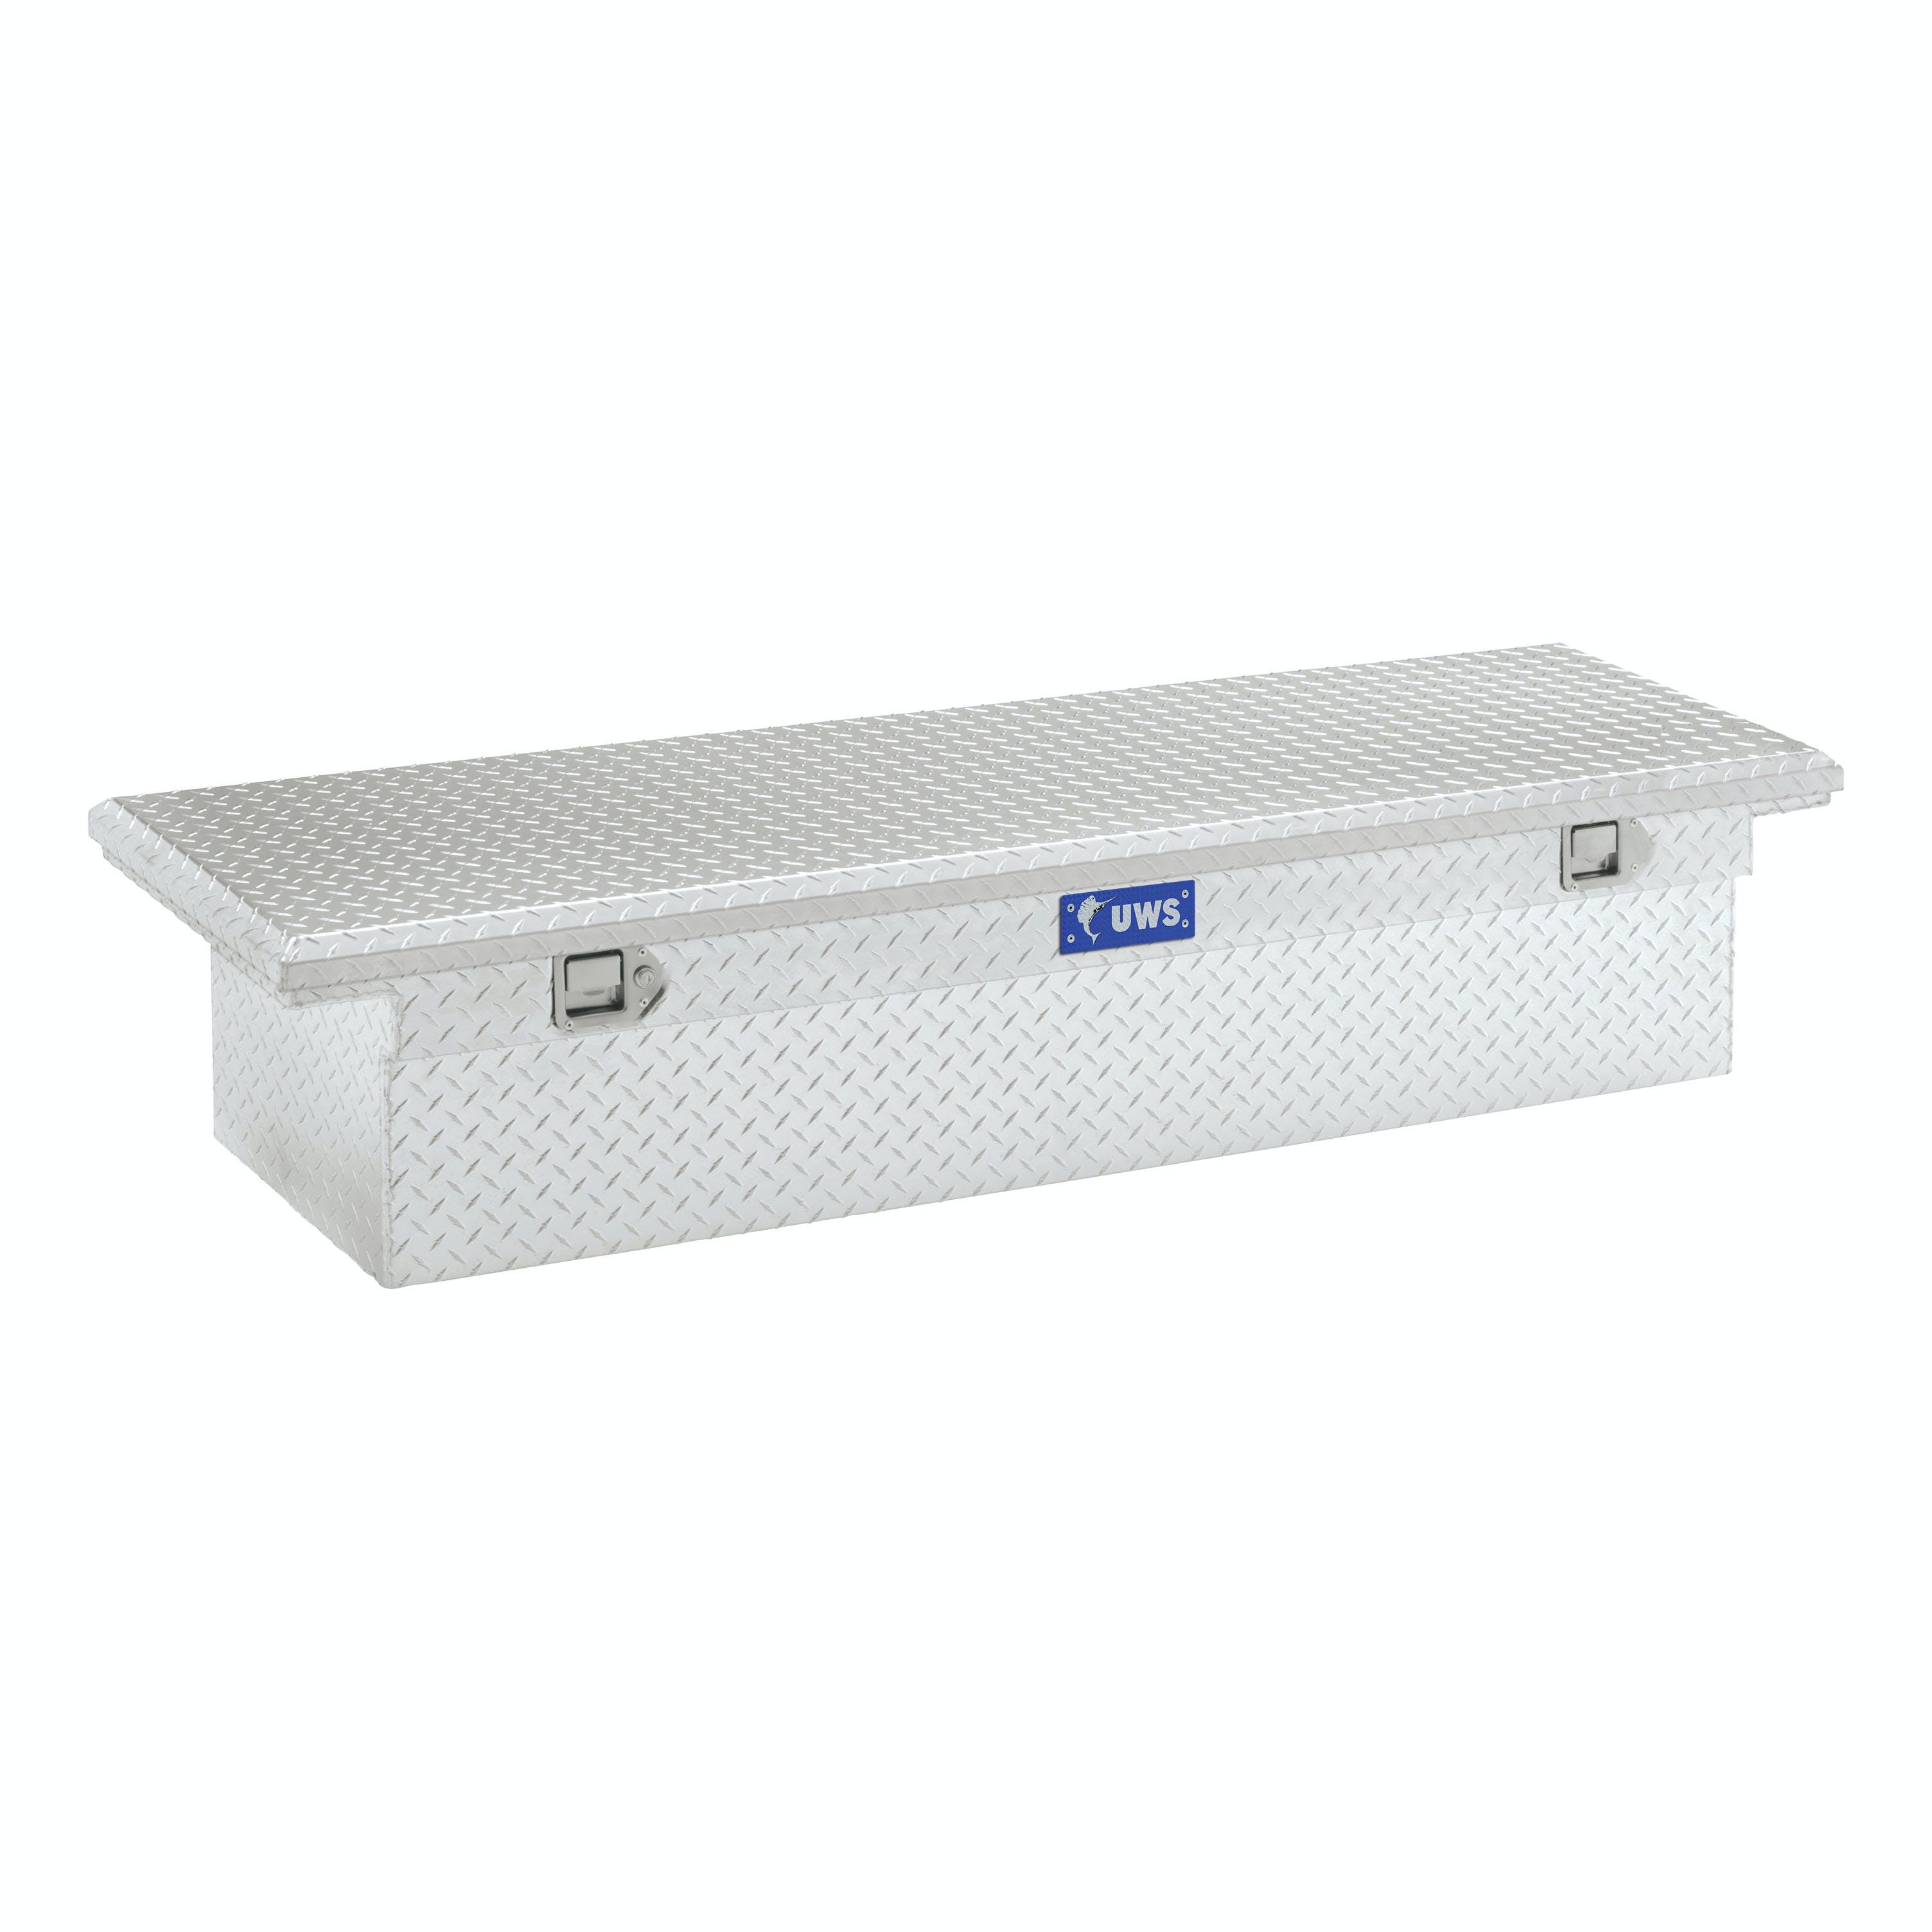 UWS TBS-63-LP 63 inch Aluminum Single Lid Crossover Toolbox Low Profile